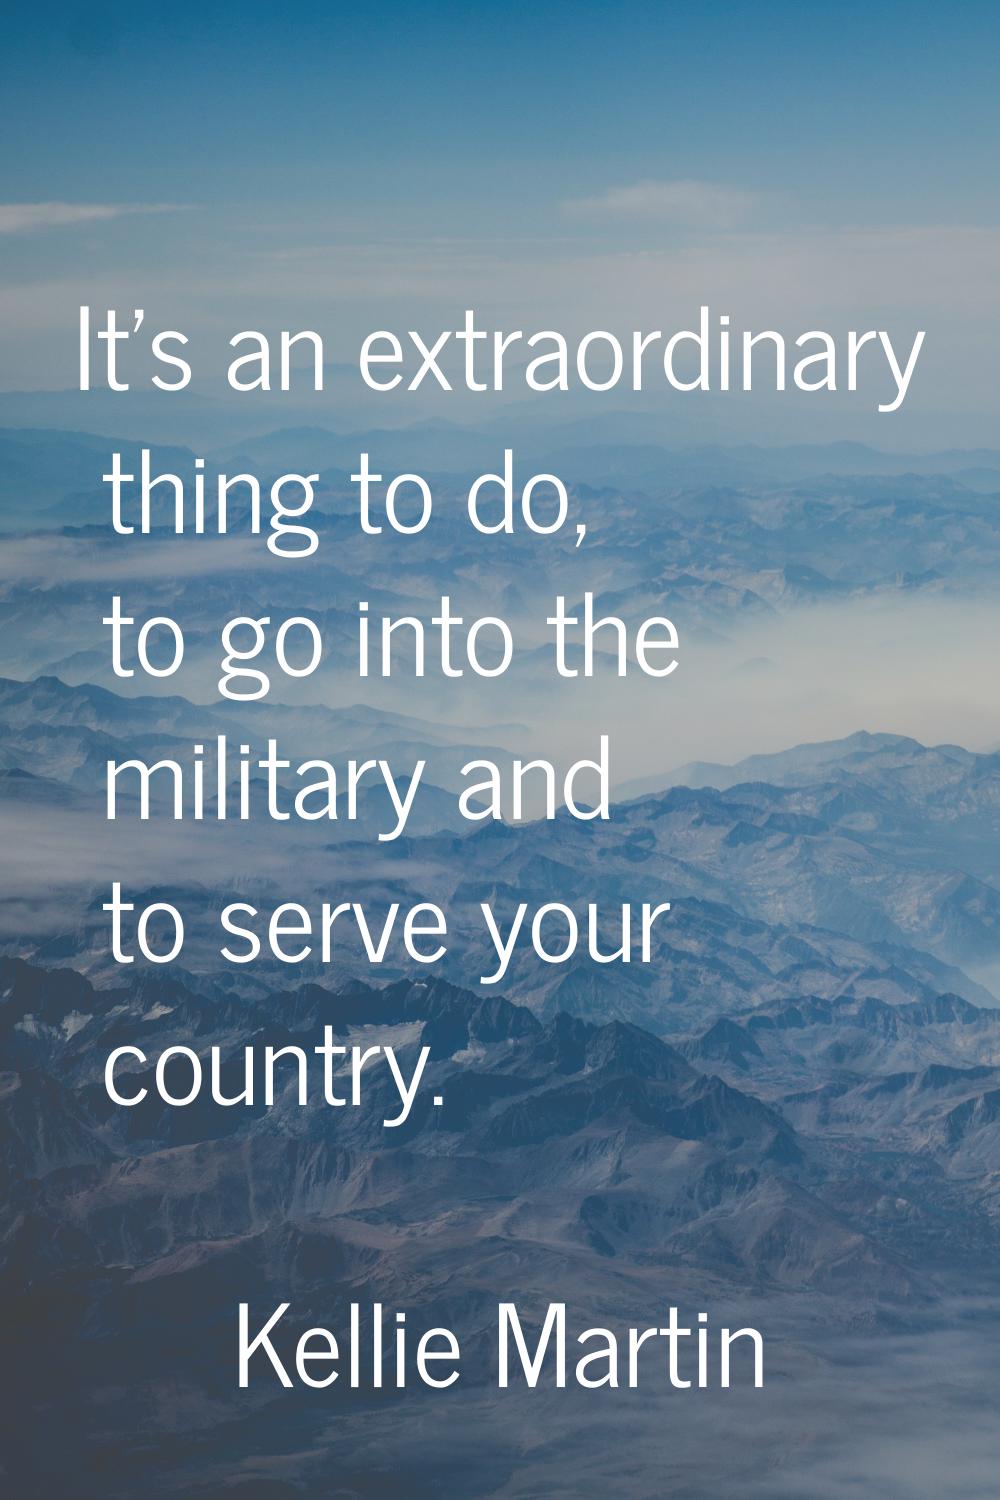 It's an extraordinary thing to do, to go into the military and to serve your country.